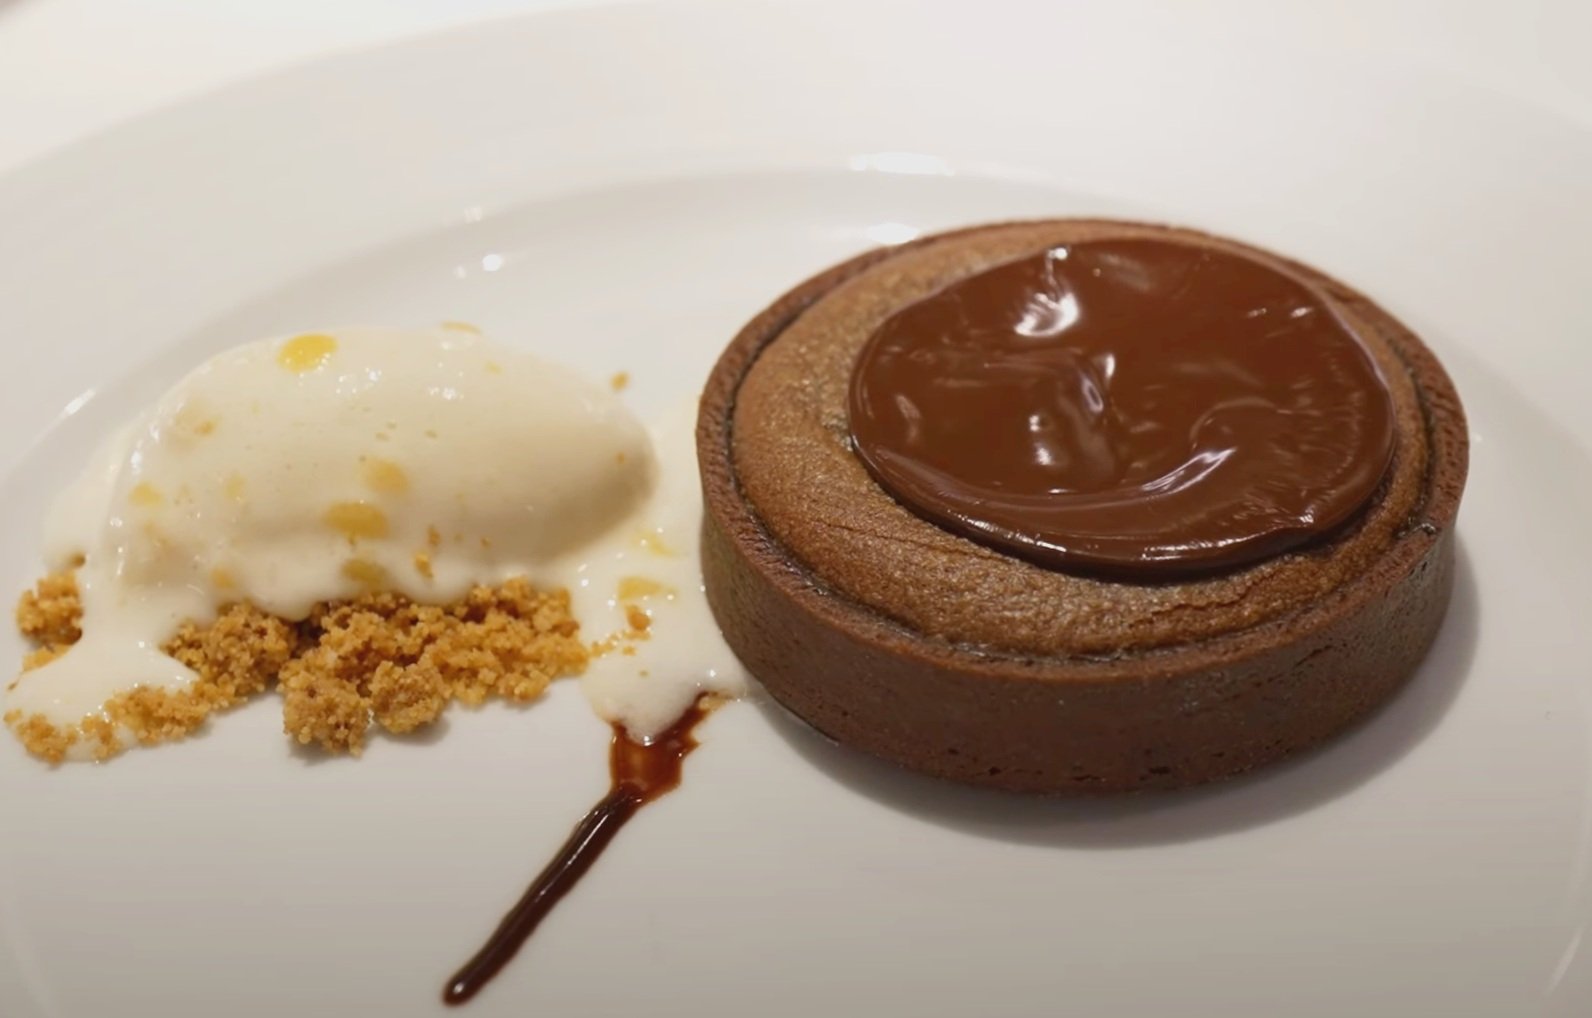  Delicious and rich chocolate tart dessert.  